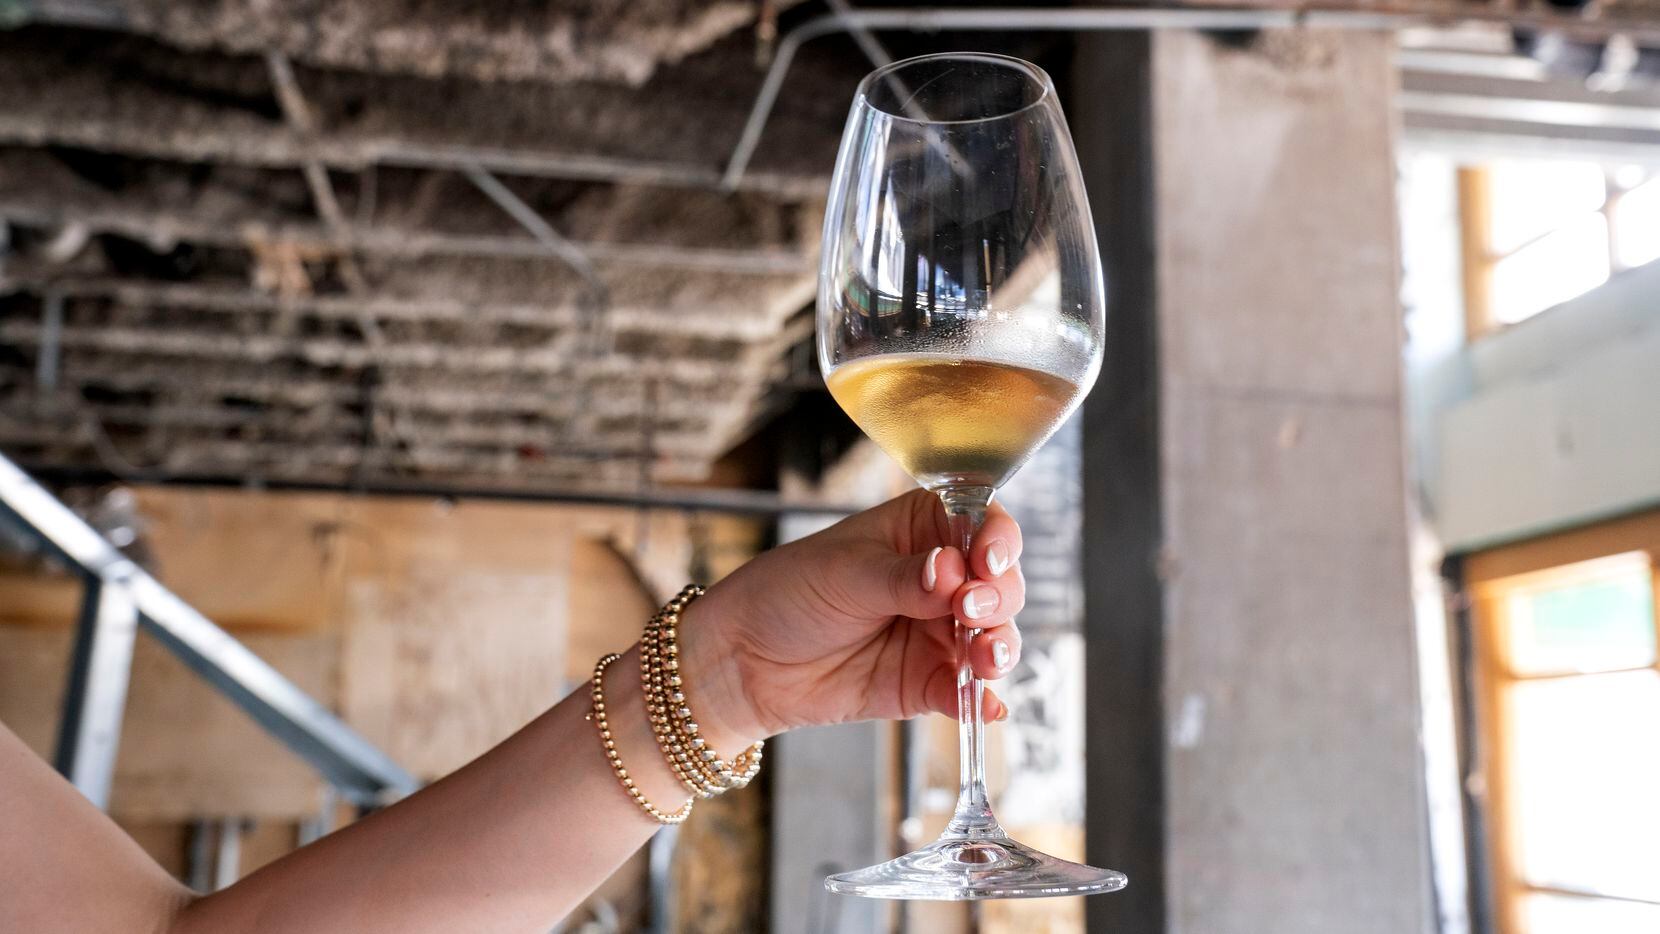 Amanda DeWitt displays a glass of wine inside the unfinished Preston Center space where she,...